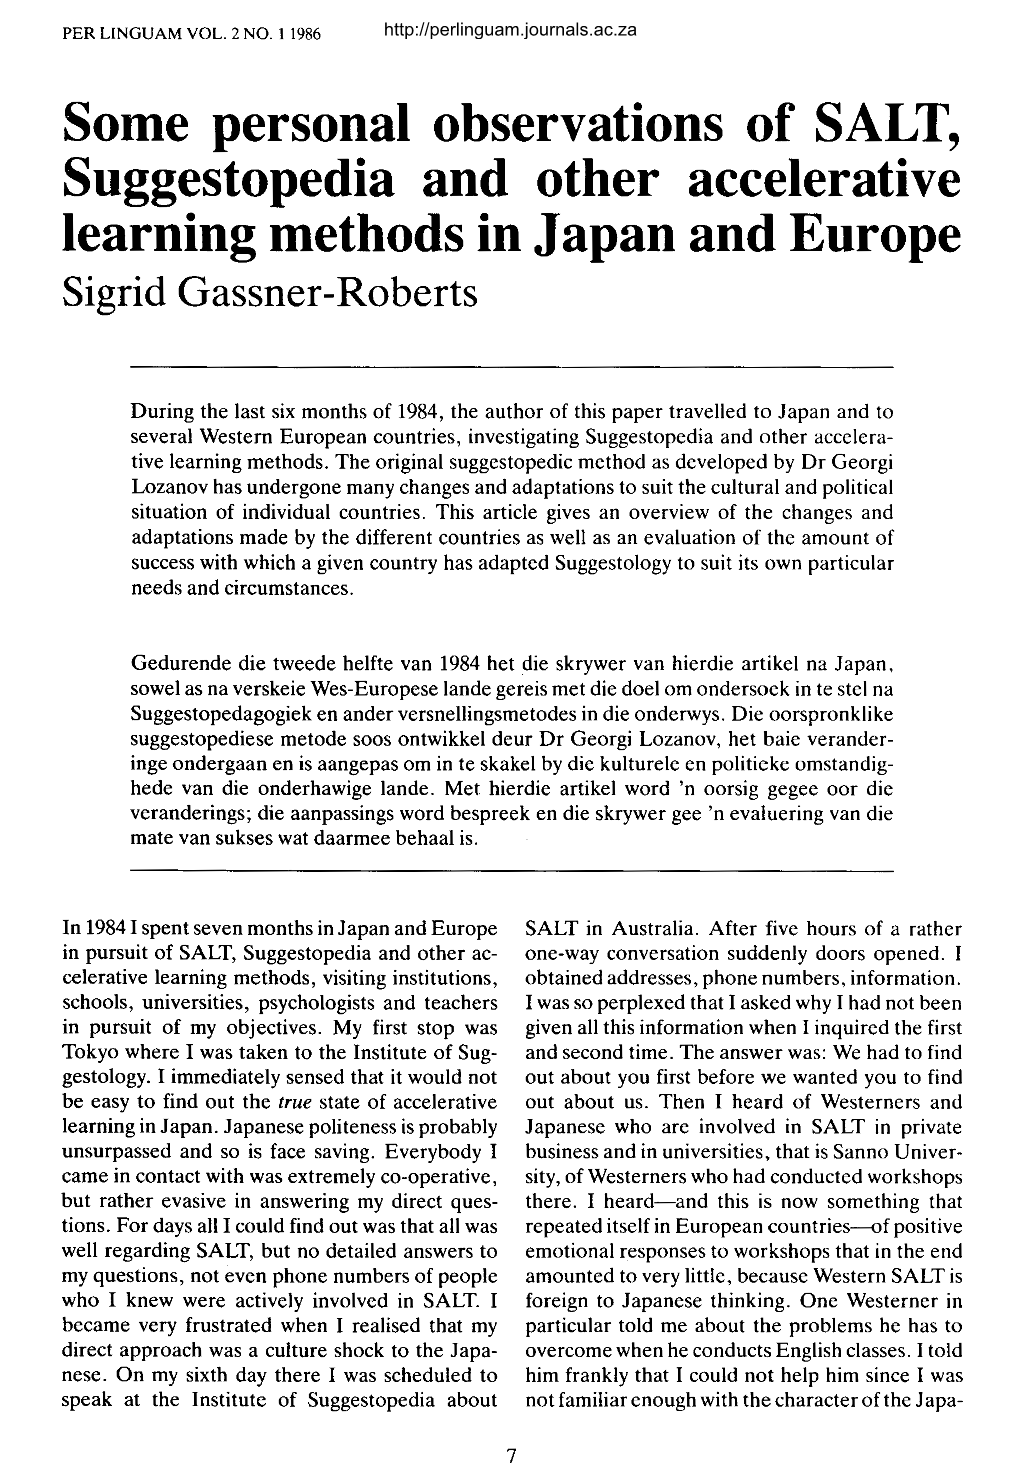 Some Personal Observations of SALT, Suggestopedia and Other Accelerative Learning Methods in Japan and Europe Si Grid Gassner-Roberts